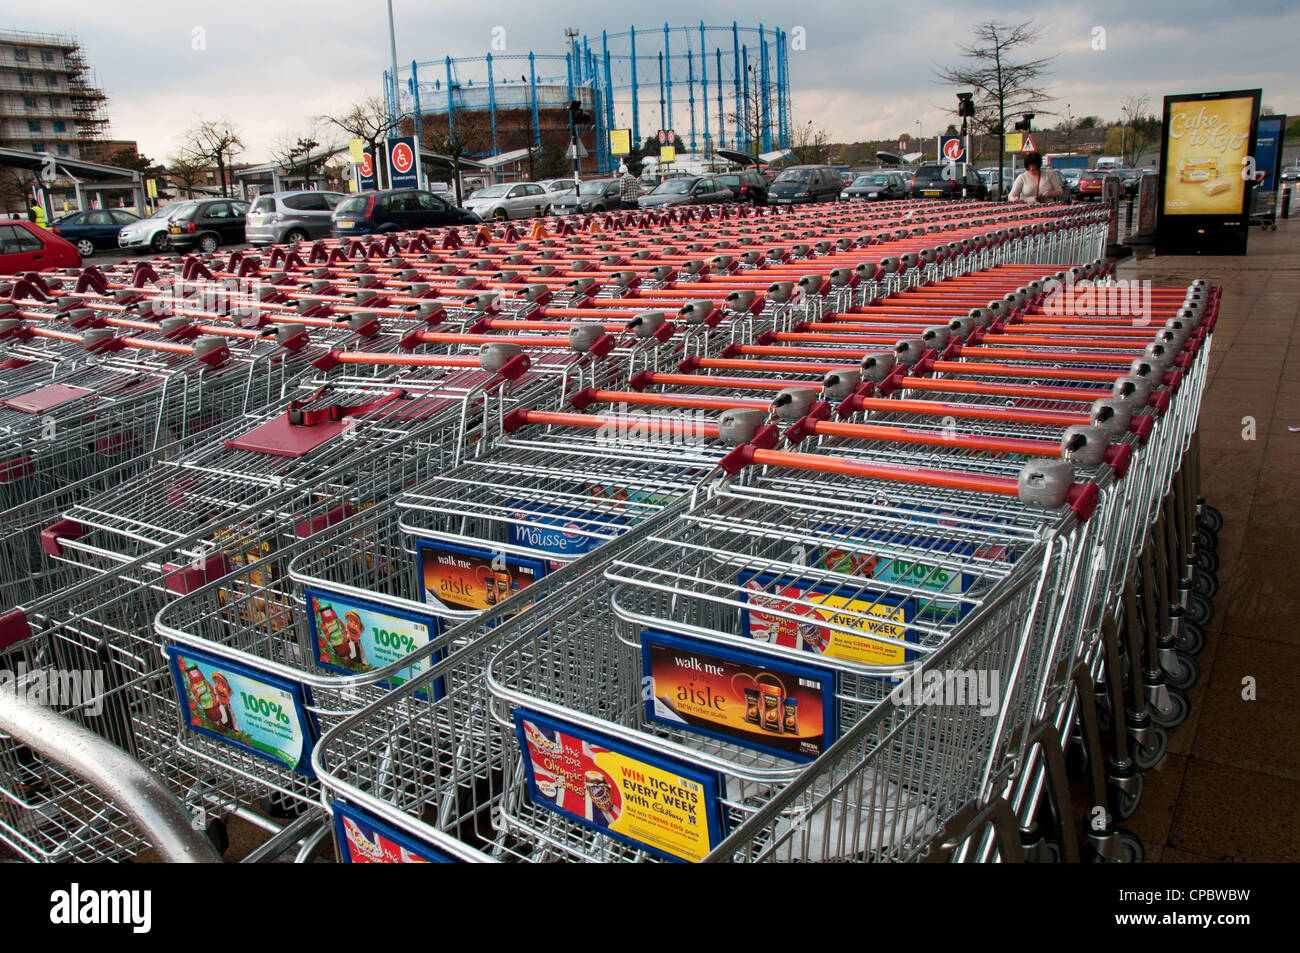 Empty trolleys lined up outside supermarket with gasometer in background Stock Photo